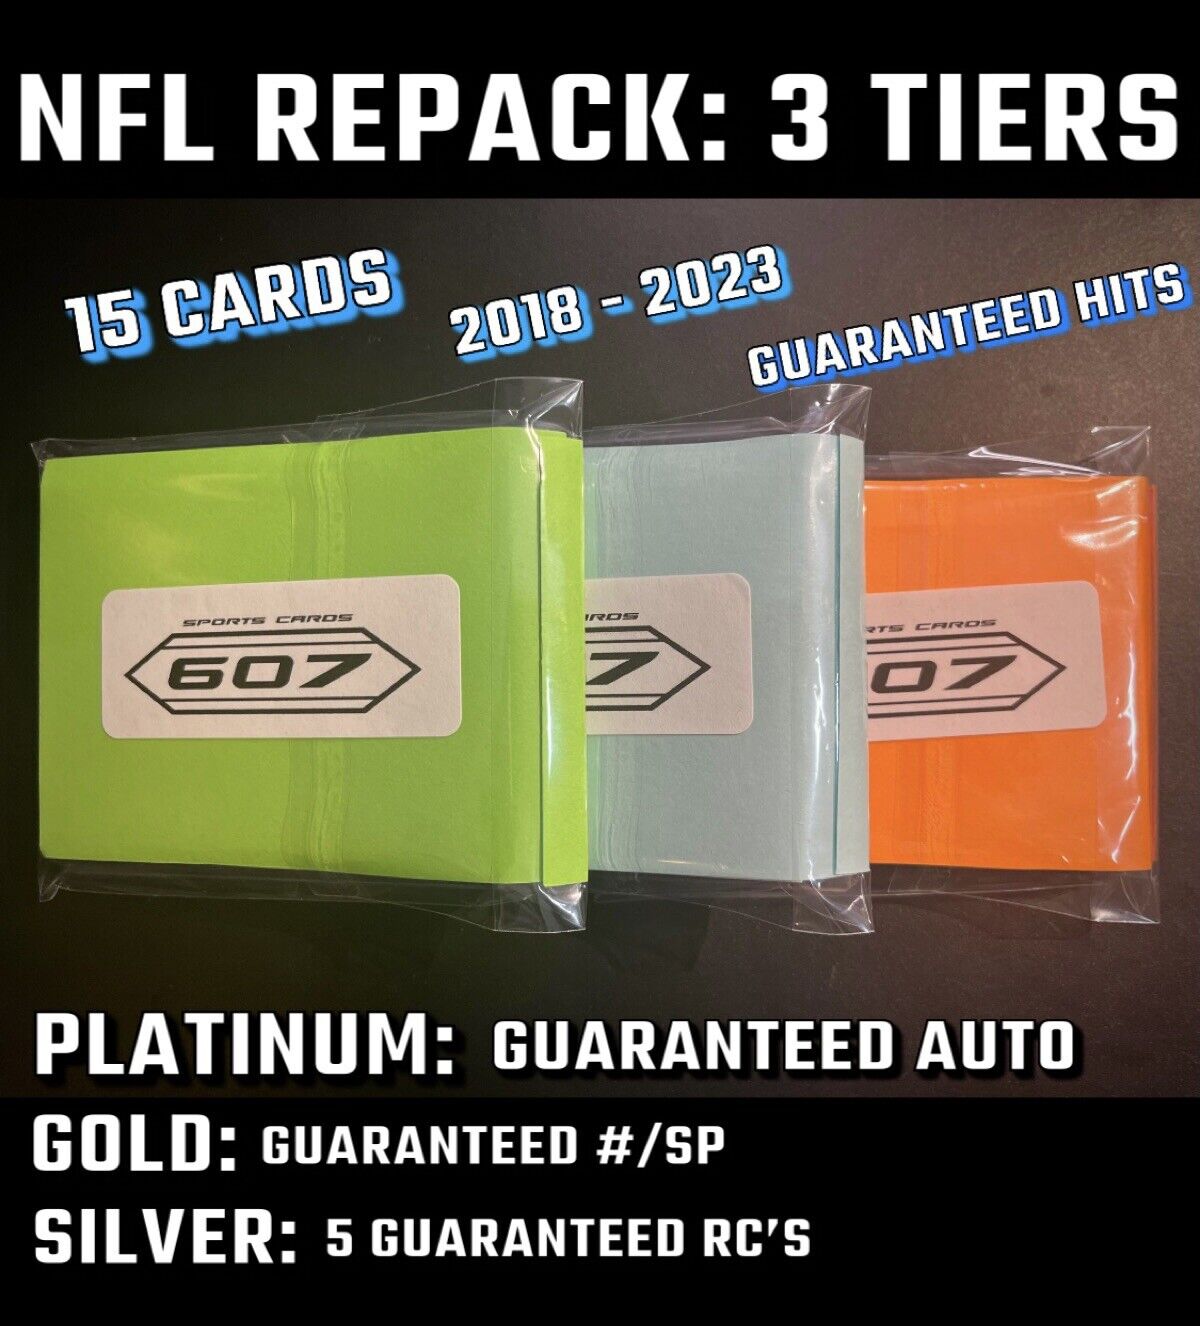 HIGH END NFL Repack 2018-2023: 15 CARDS w/ GUARANTEED Auto, Relic, RCs: 3 Tiers